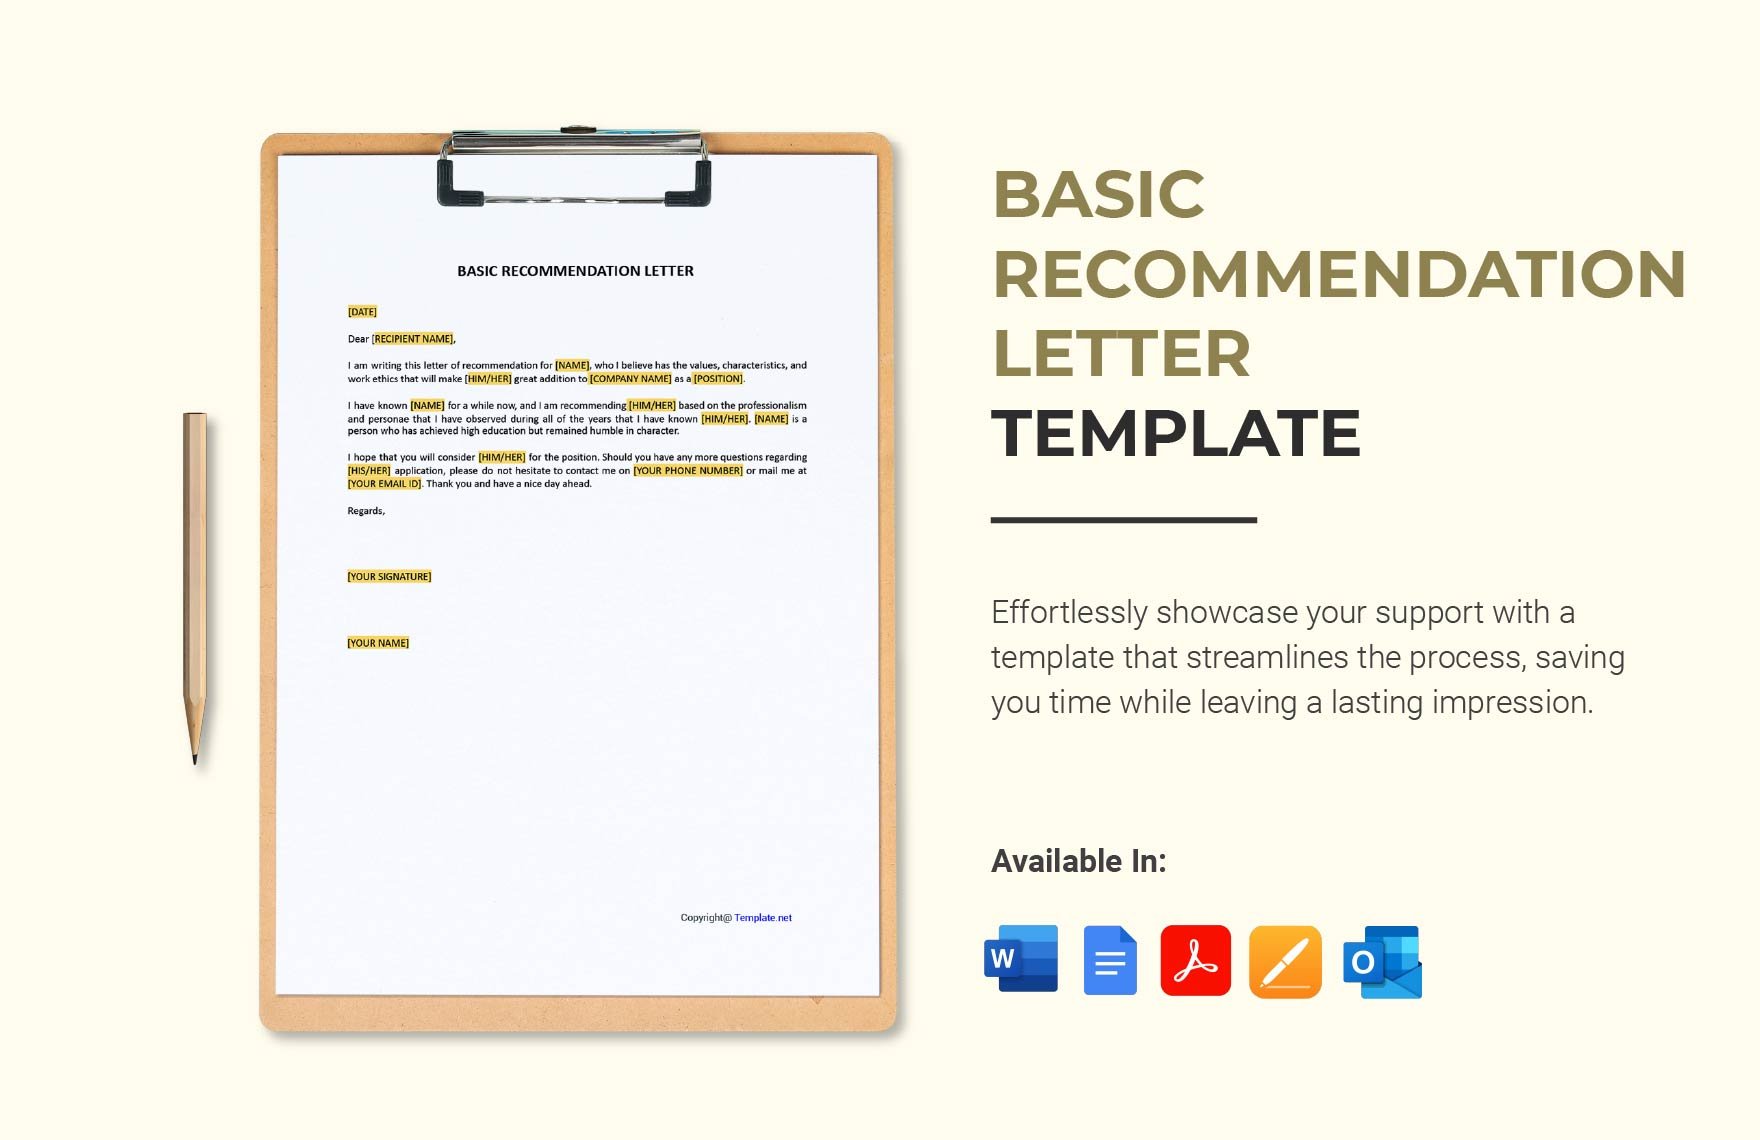 Basic Recommendation Letter Template in Word, Google Docs, PDF, Apple Pages, Outlook